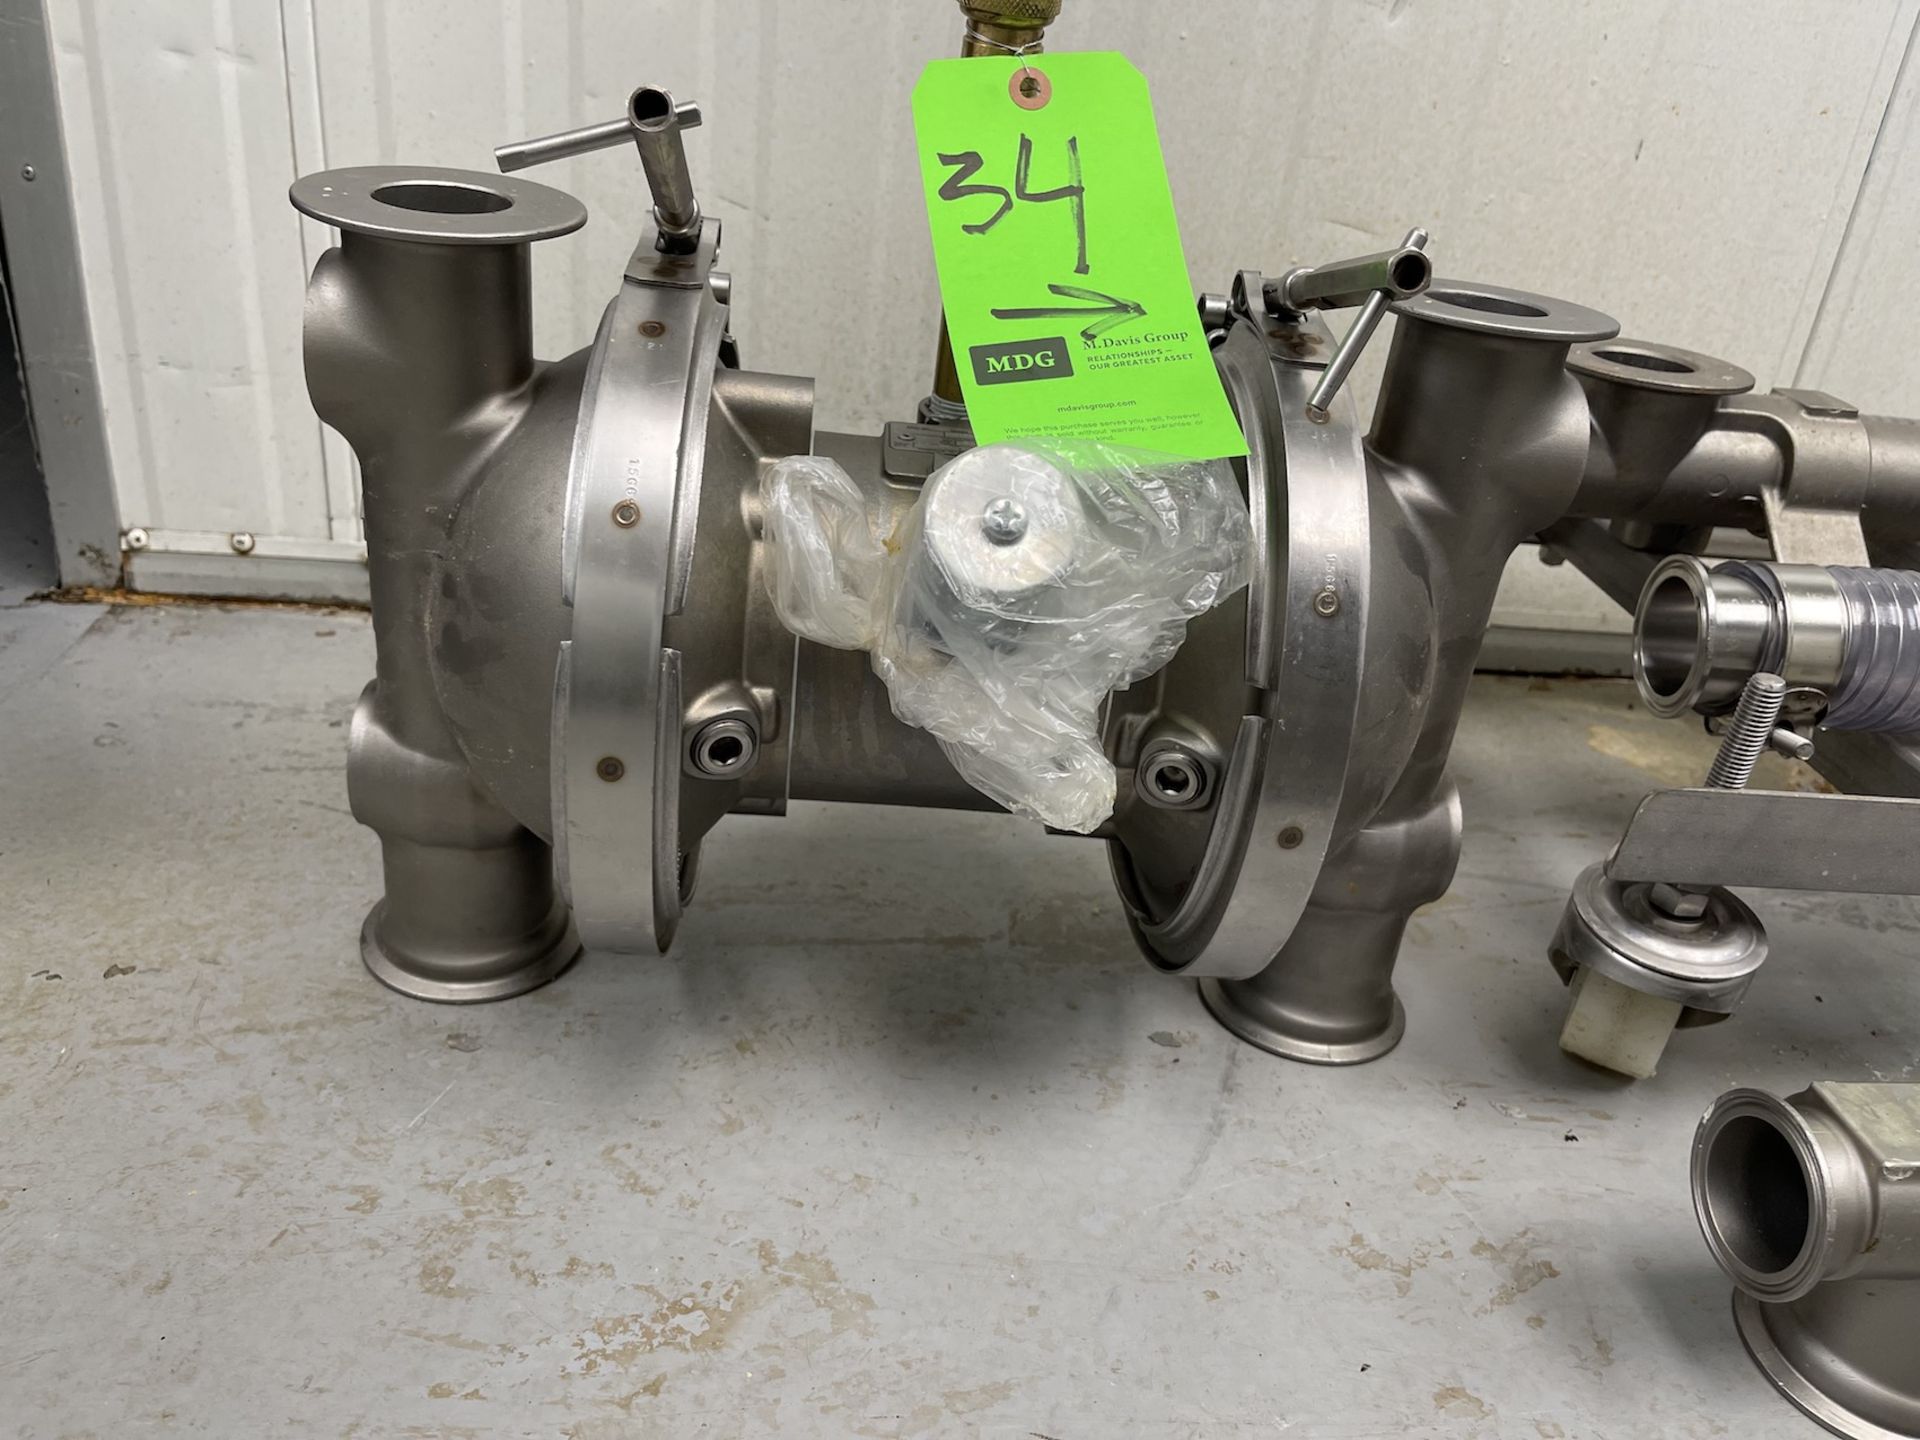 GRACO SANIFORCE 1650 S/S DIAPHRAGM PUMP, MODEL 05H15A, 100-378 GPM, 3120-8.2 MAX FLUID AND AIR PSI - Image 2 of 12